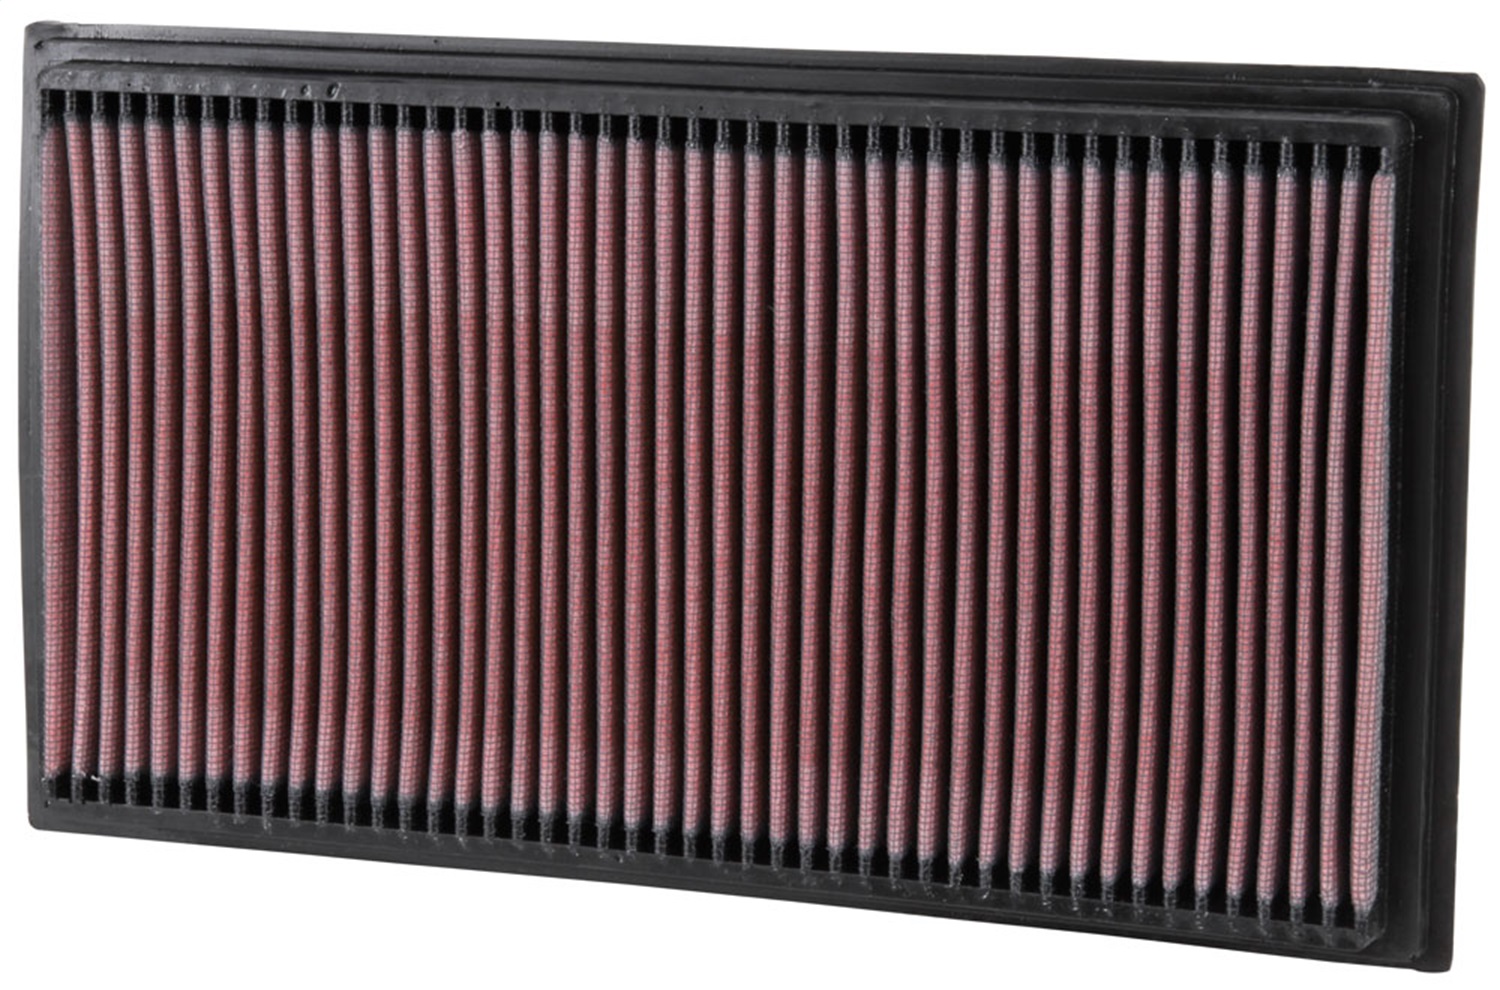 K&N Filters K&N Filters 33-2747 Air Filter Fits 96-99 E320 E420 E430